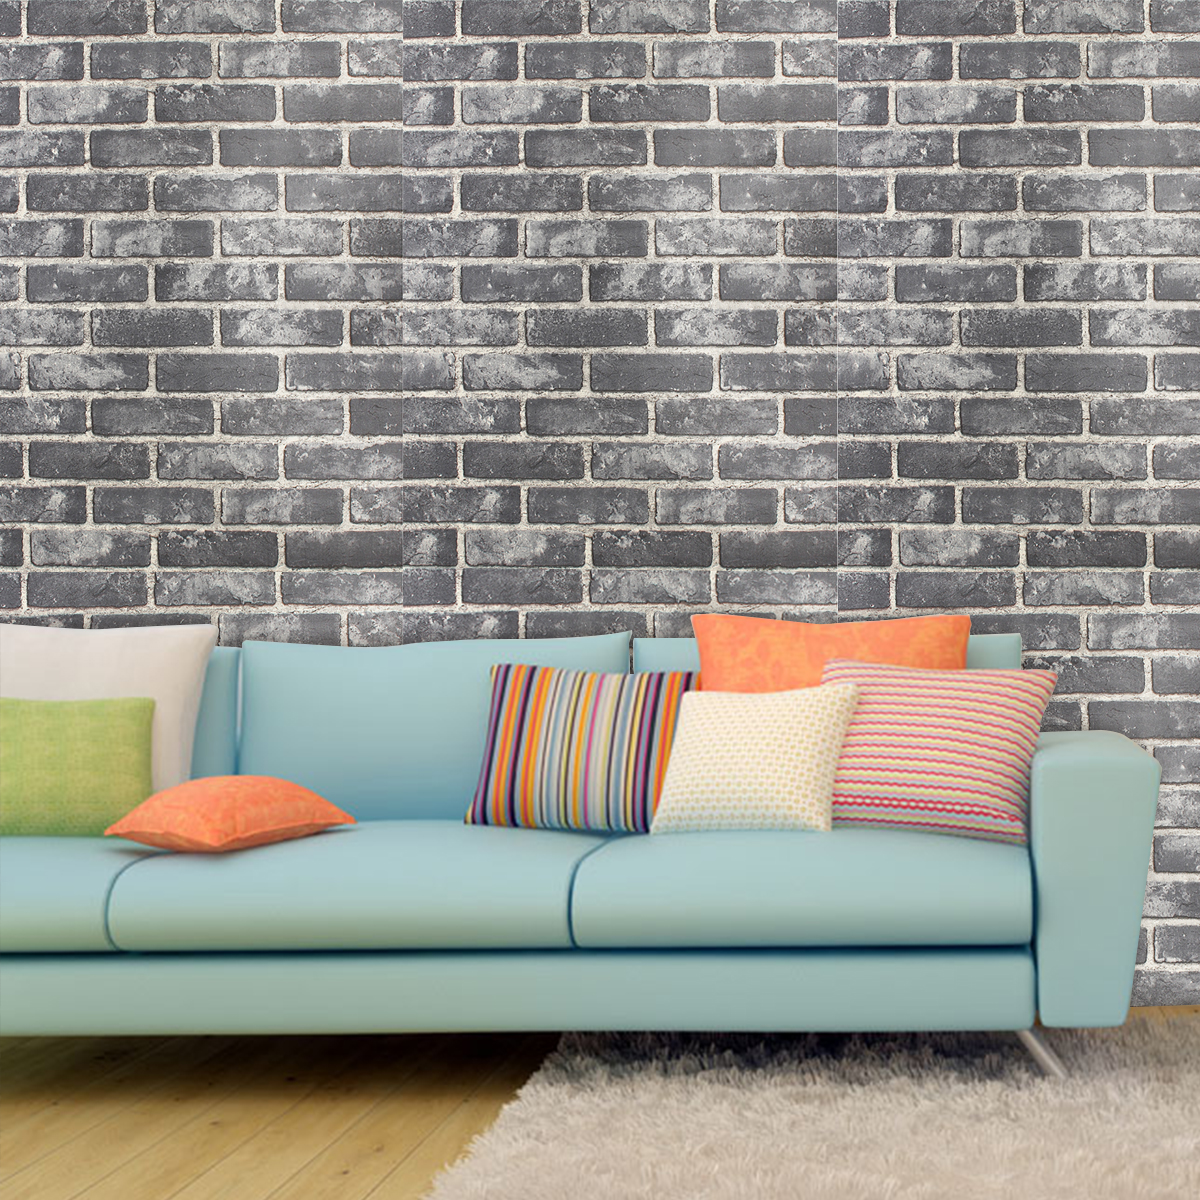 Wall Living Room Background - HD Wallpaper 